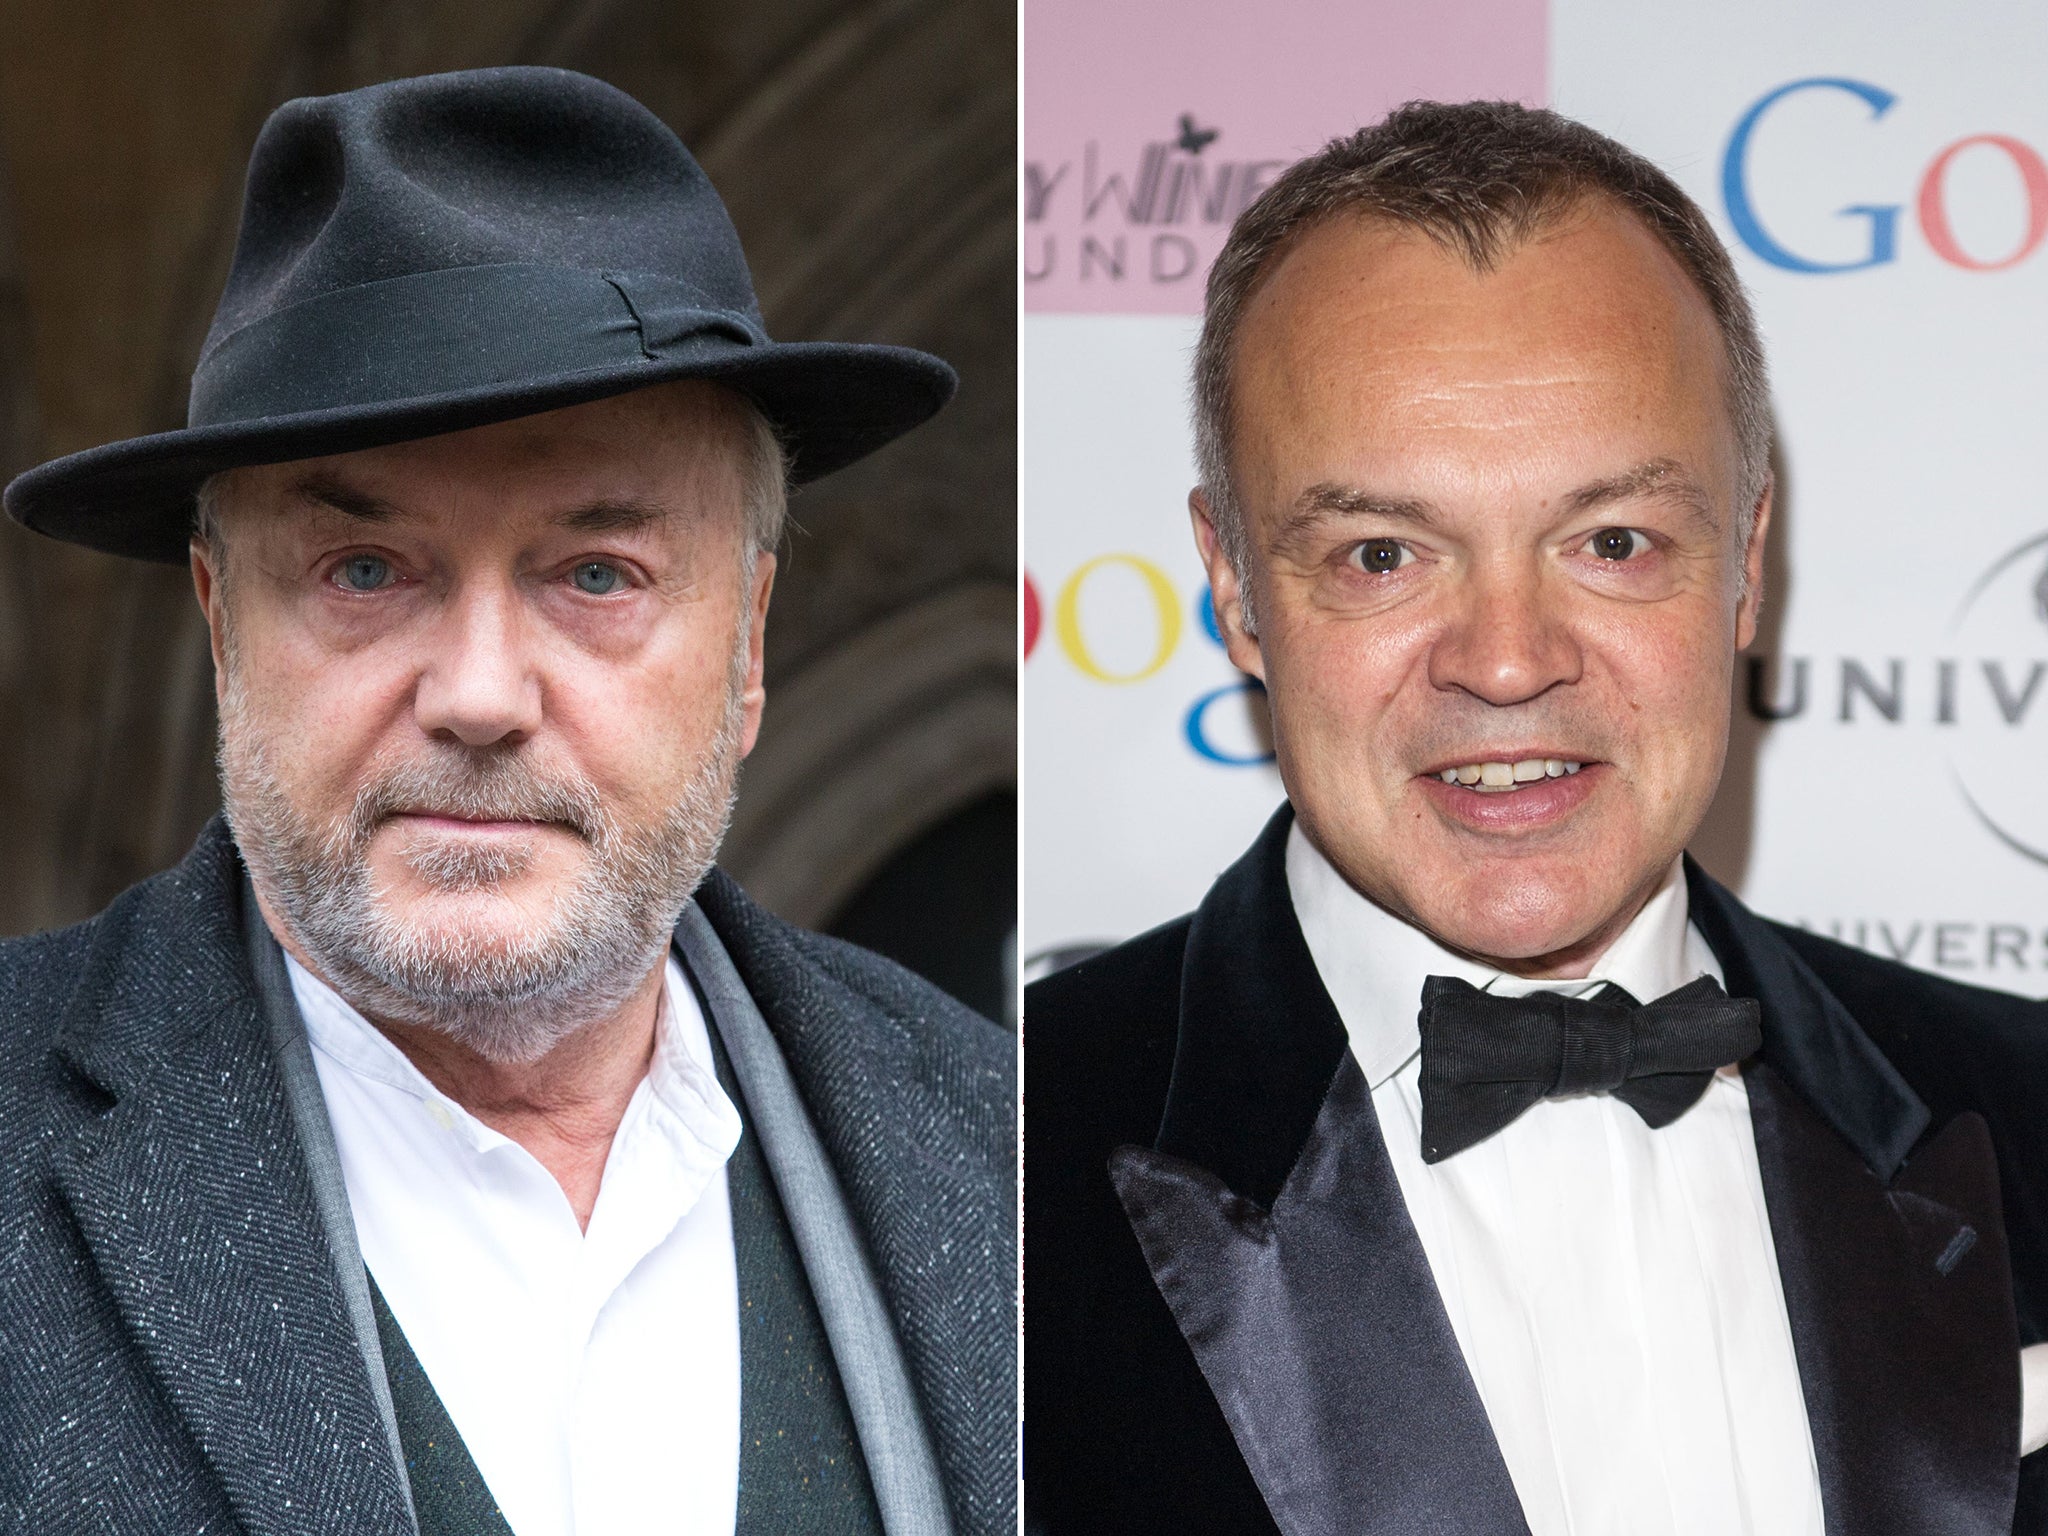 The BBC presenter and comic, Graham Norton, lives close to George Galloway’s old constituency of Bow and Poplar (Rex)